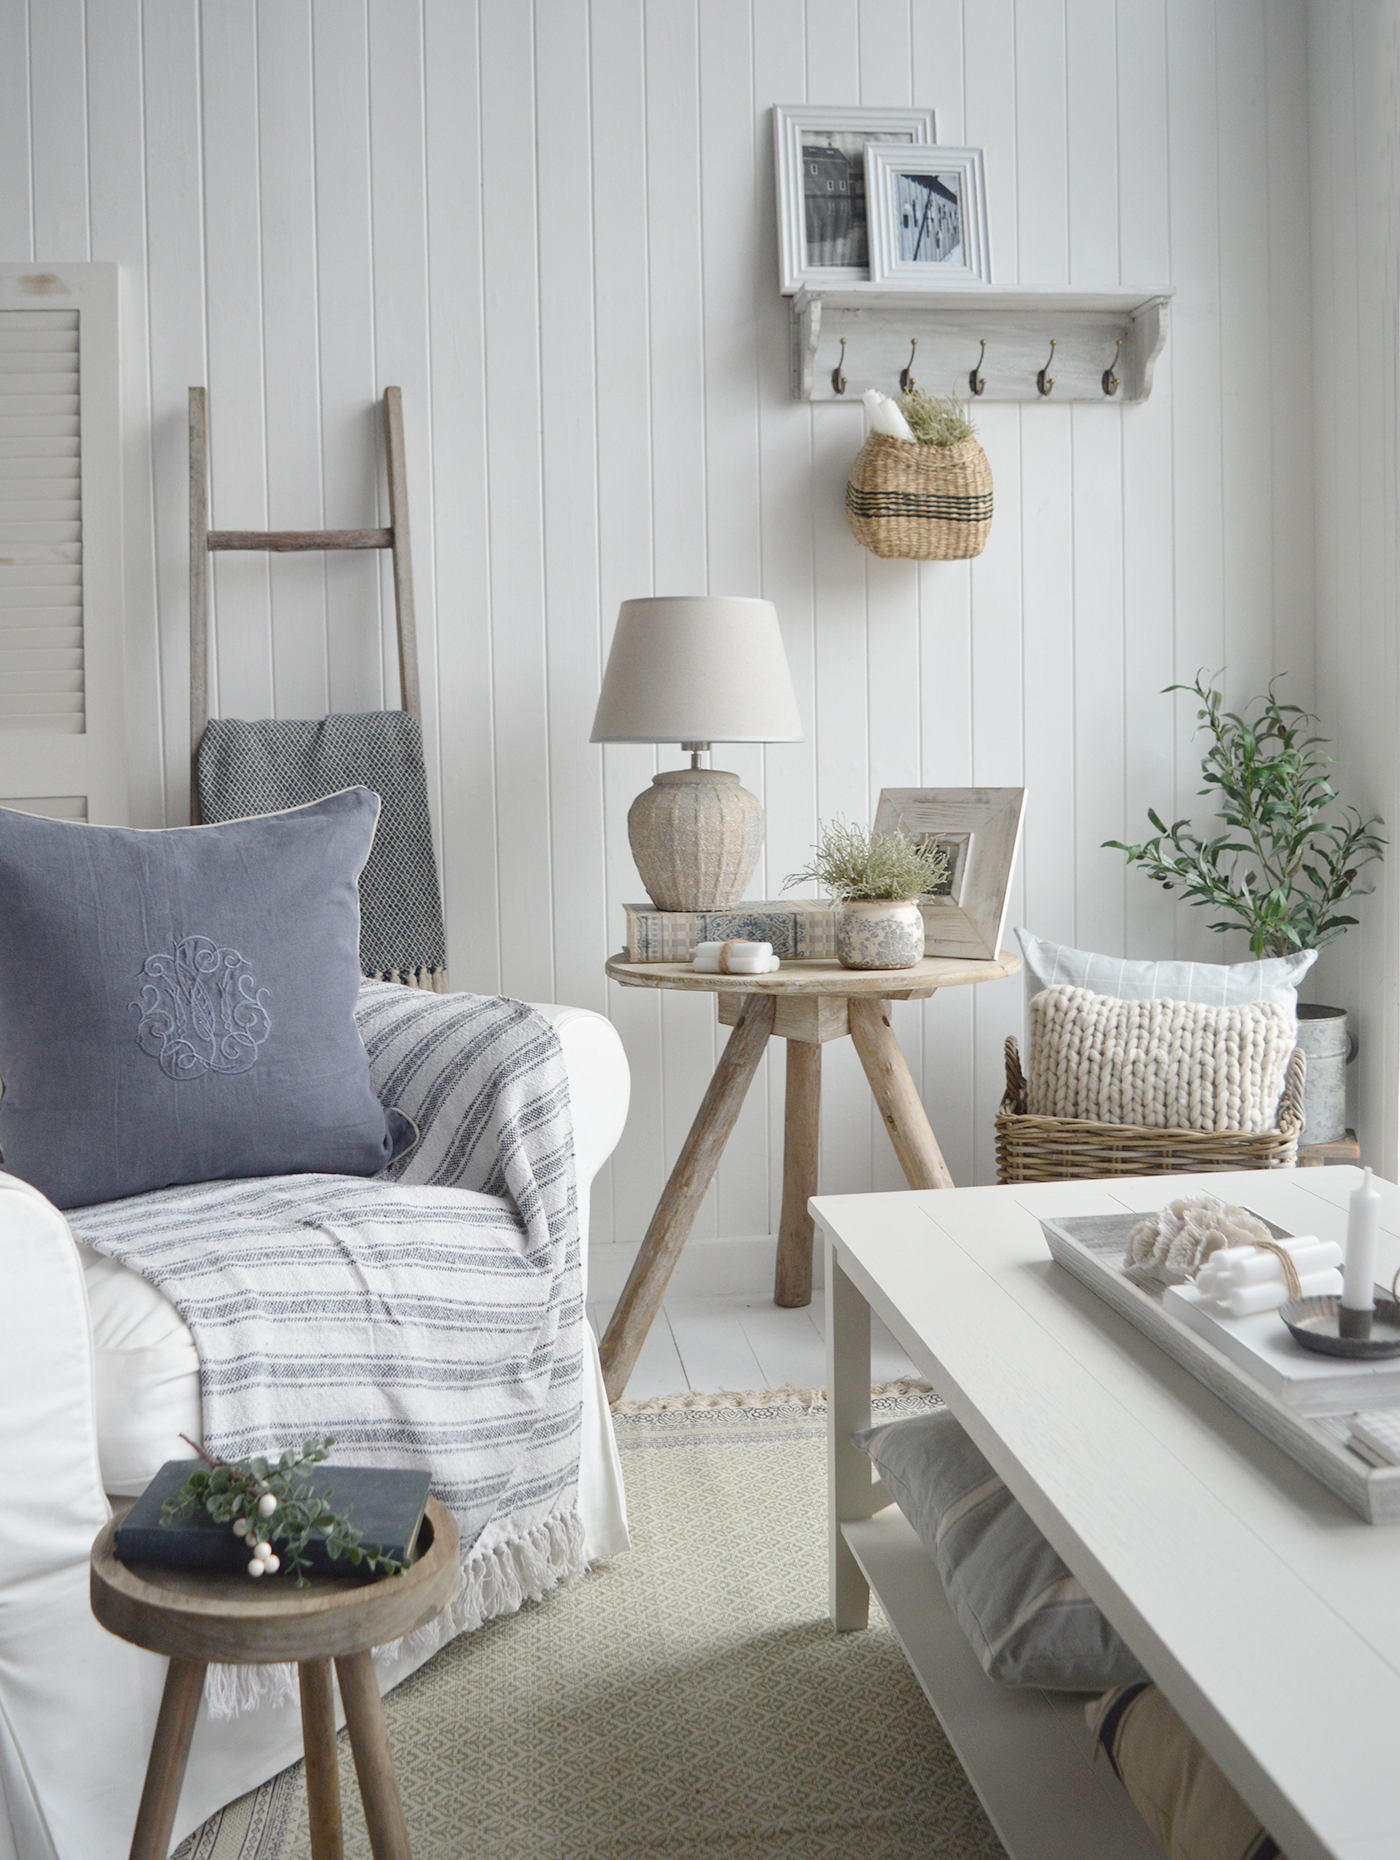 New enakfn modern farmhouse, country and coastal furniture for the living room, including dfriftwood lamp table, lamp and home decor accessories cushions and throws.